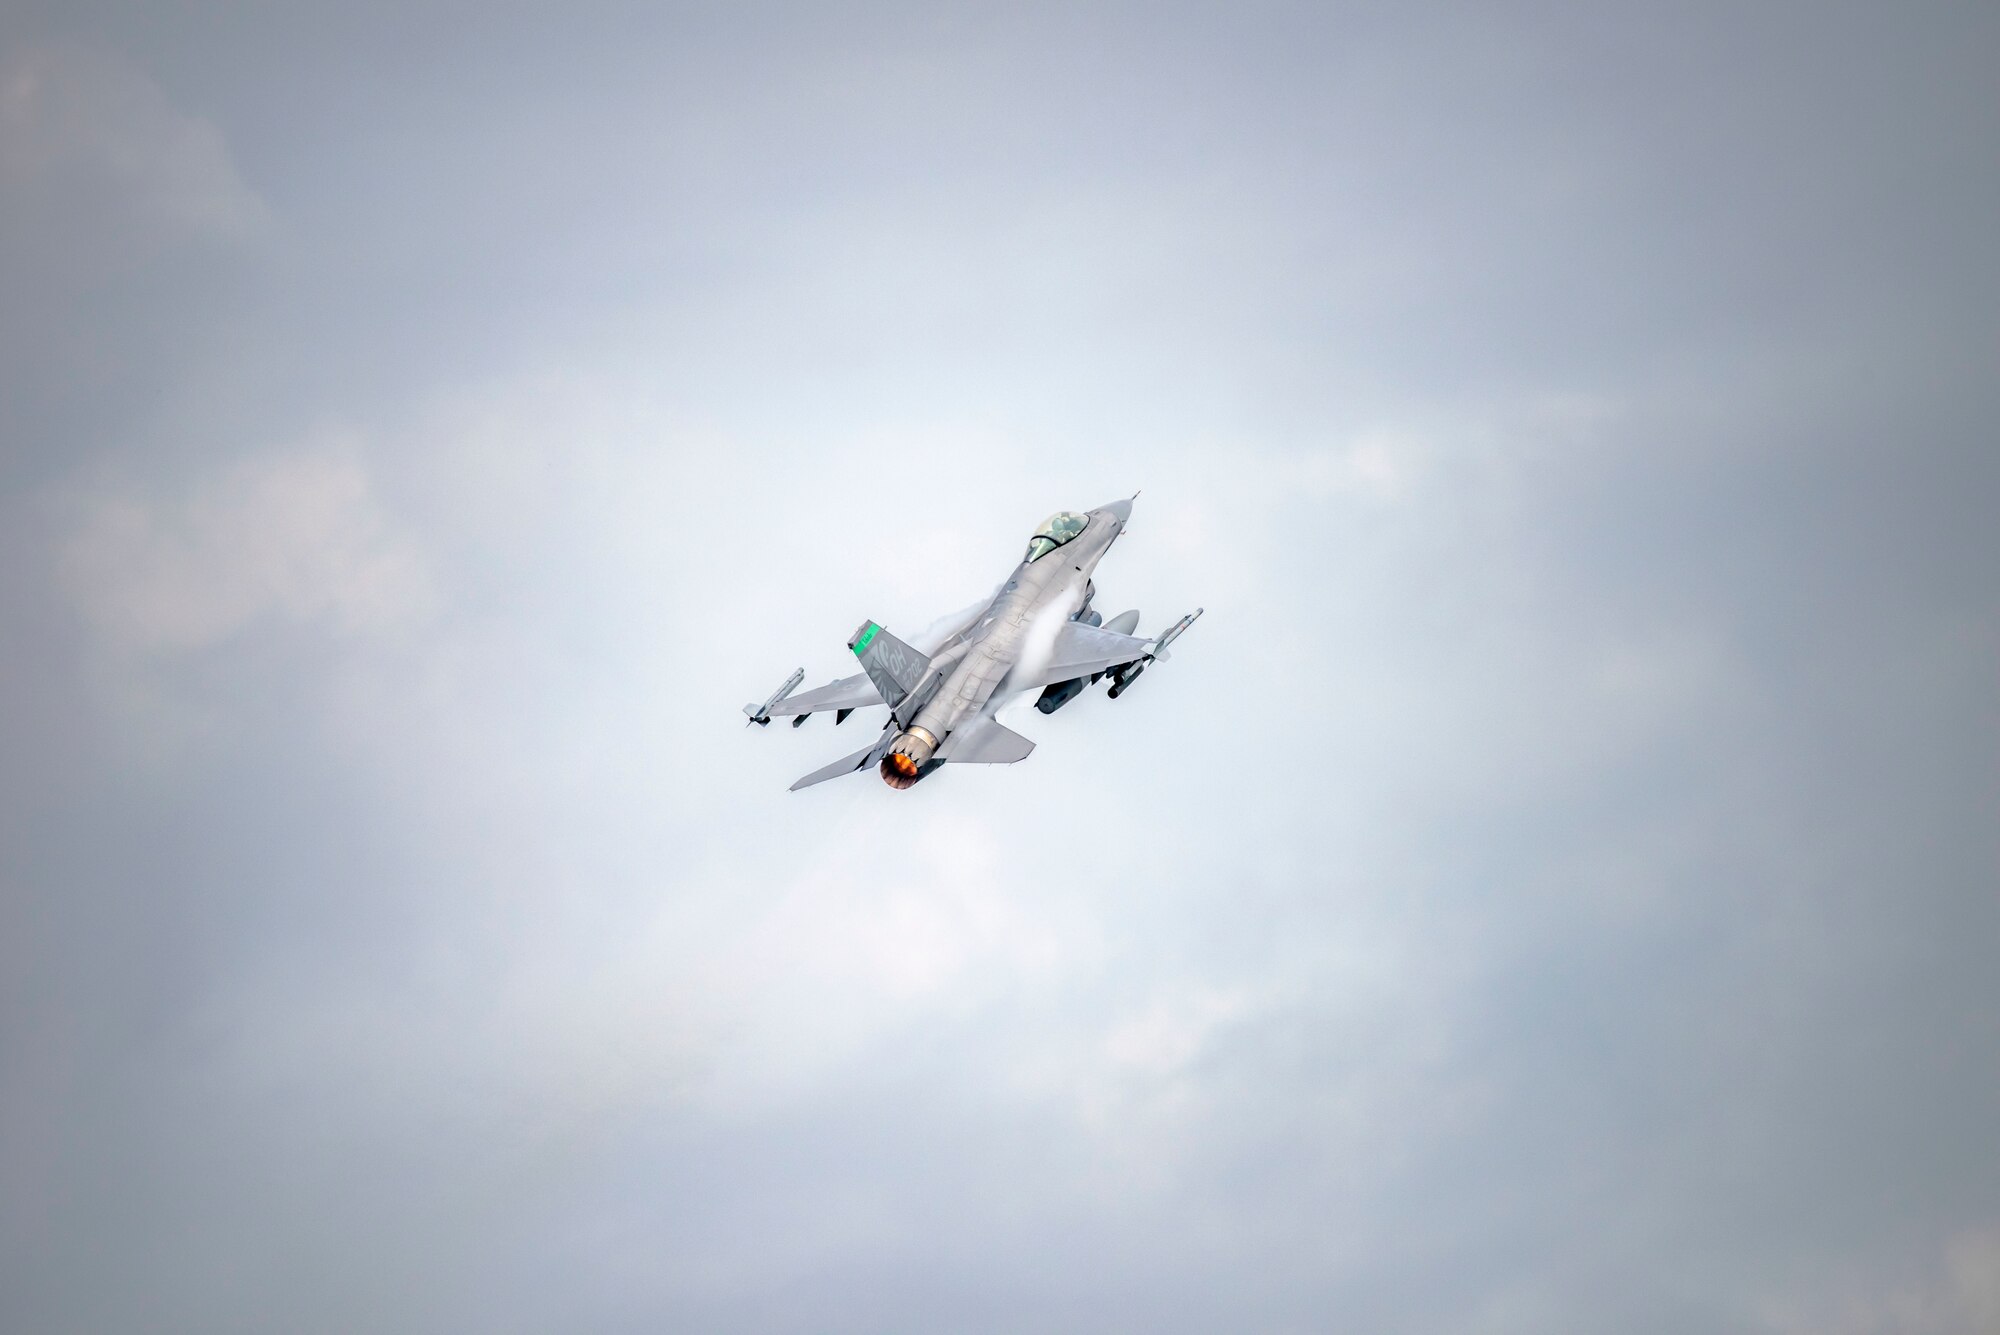 U.S. Air Force Lt. Col. Garrick Webb, an F-16 Fighter Pilot assigned to the Ohio National Guard’s 180th Fighter Wing, takes off in an F-16 Fighting Falcon during a training flight at the 180FW in Swanton, Ohio, July 30, 2020.